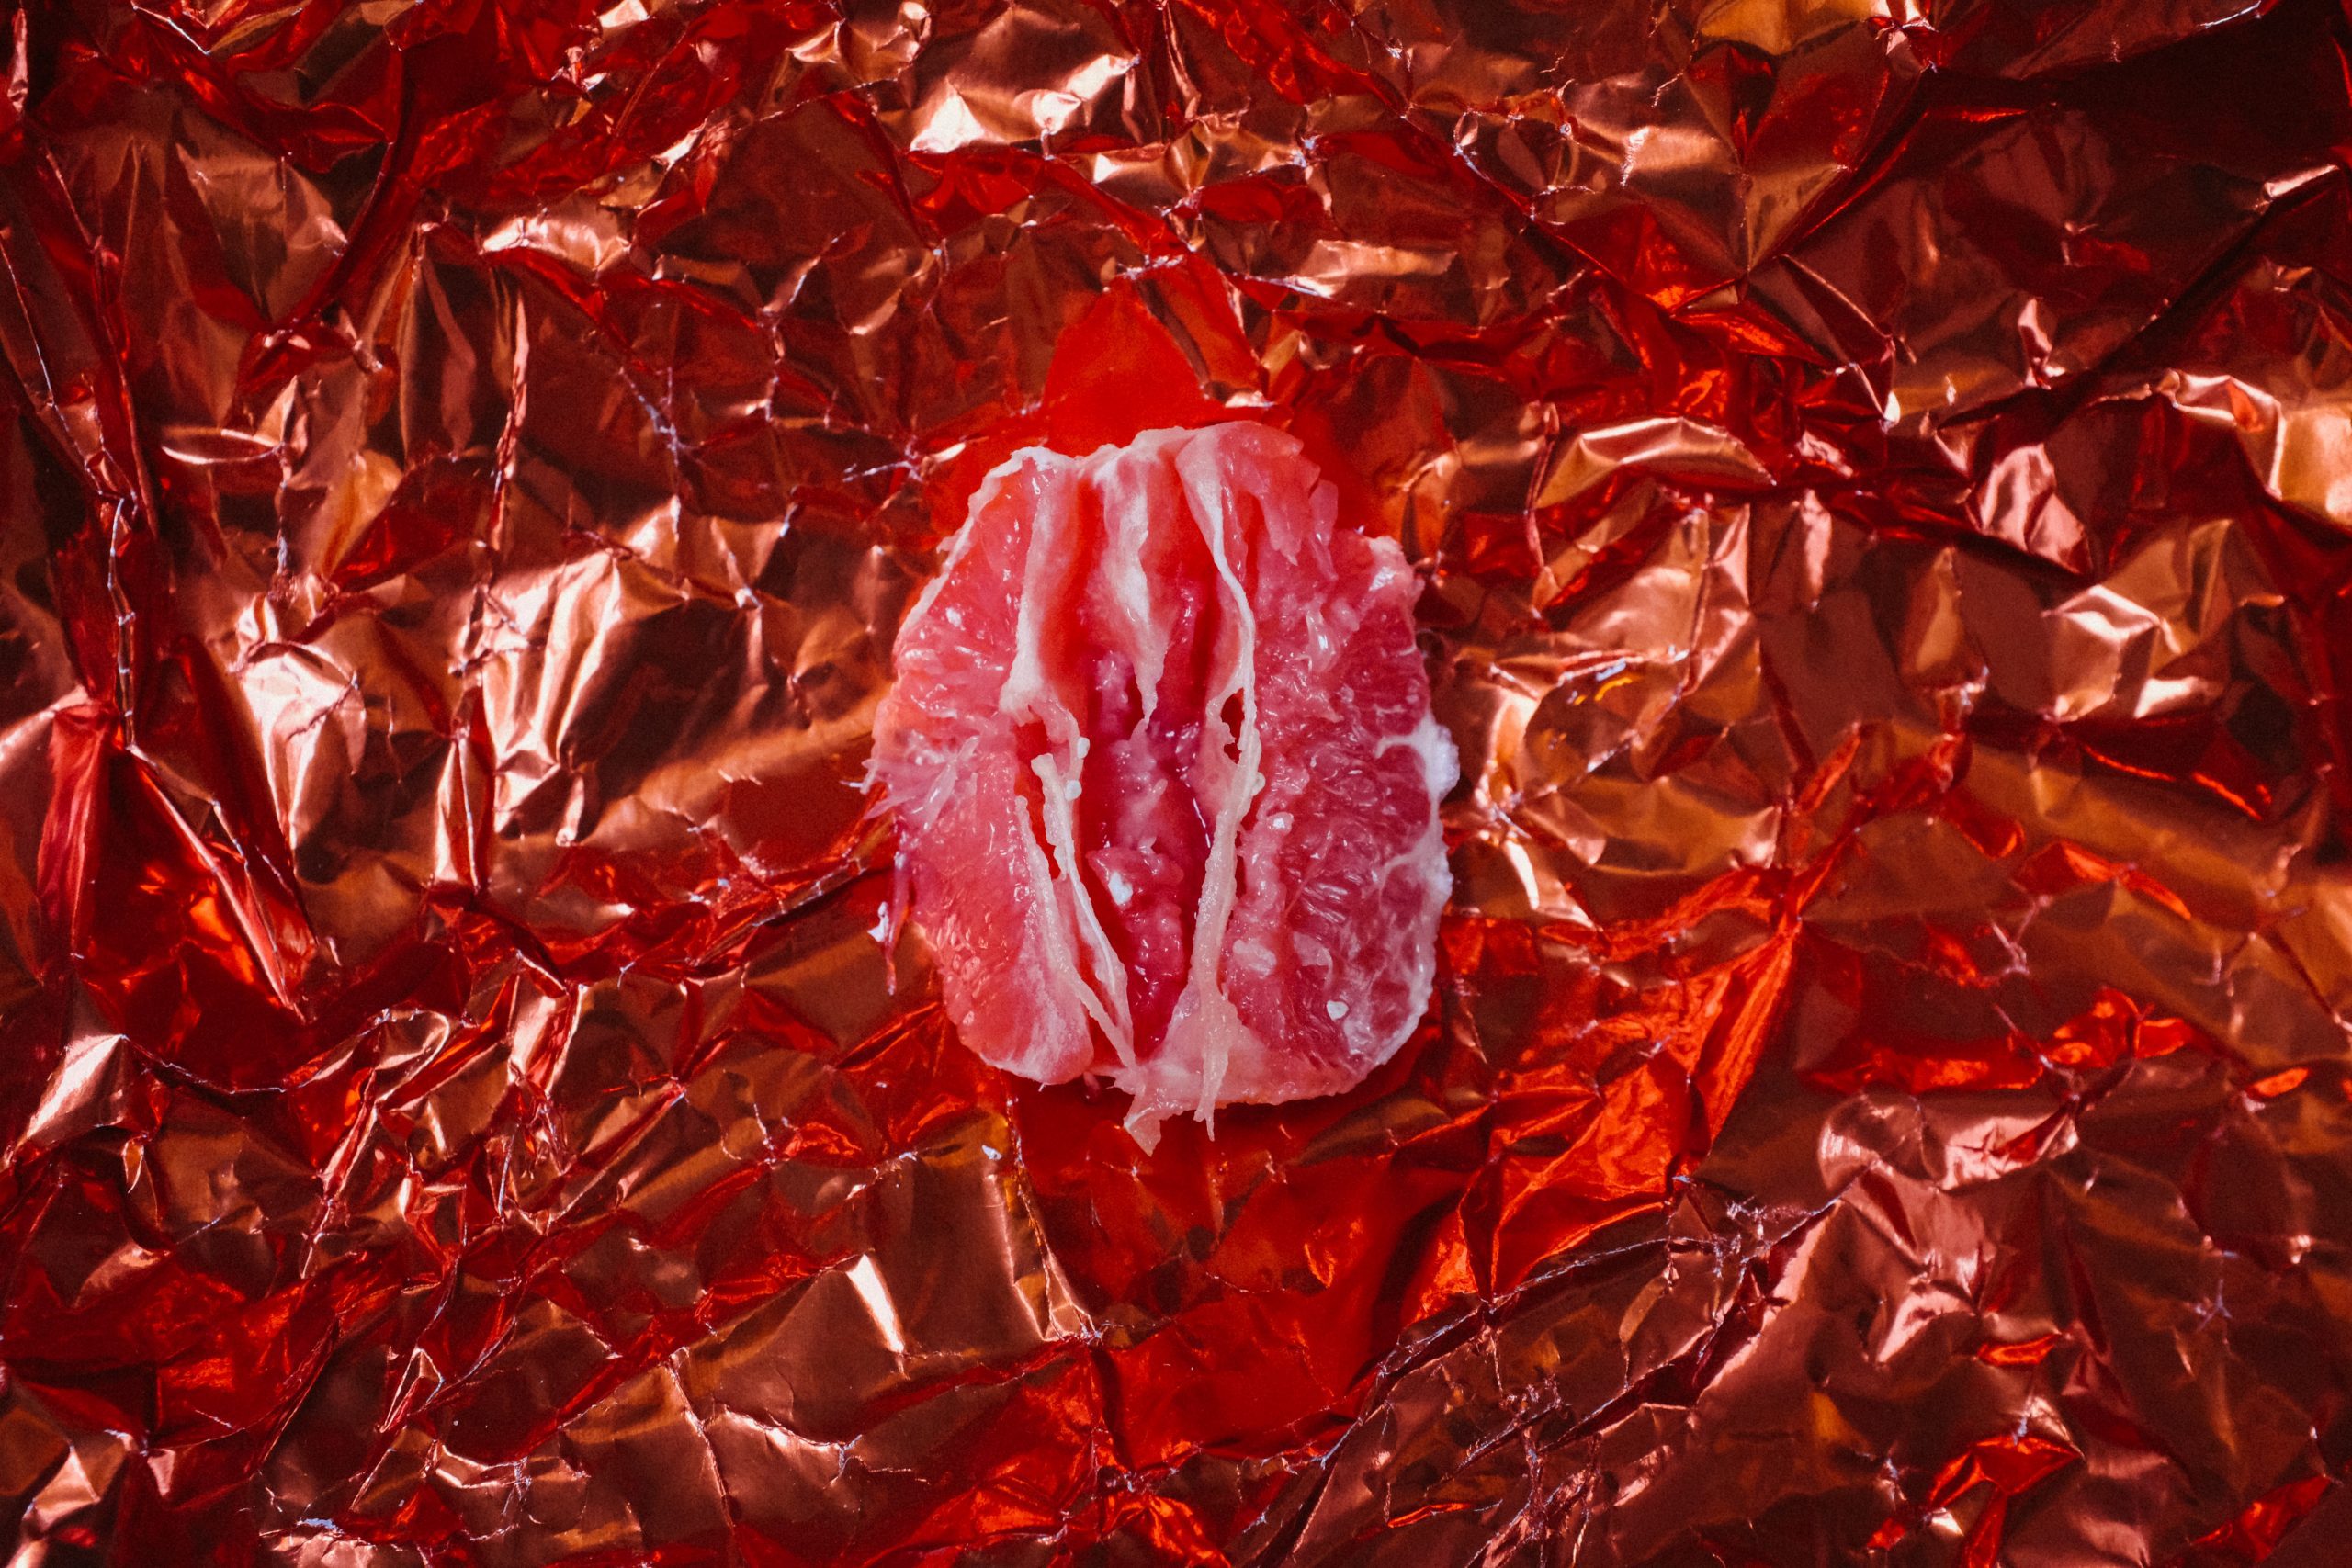 section of grapefruit on a red foil background